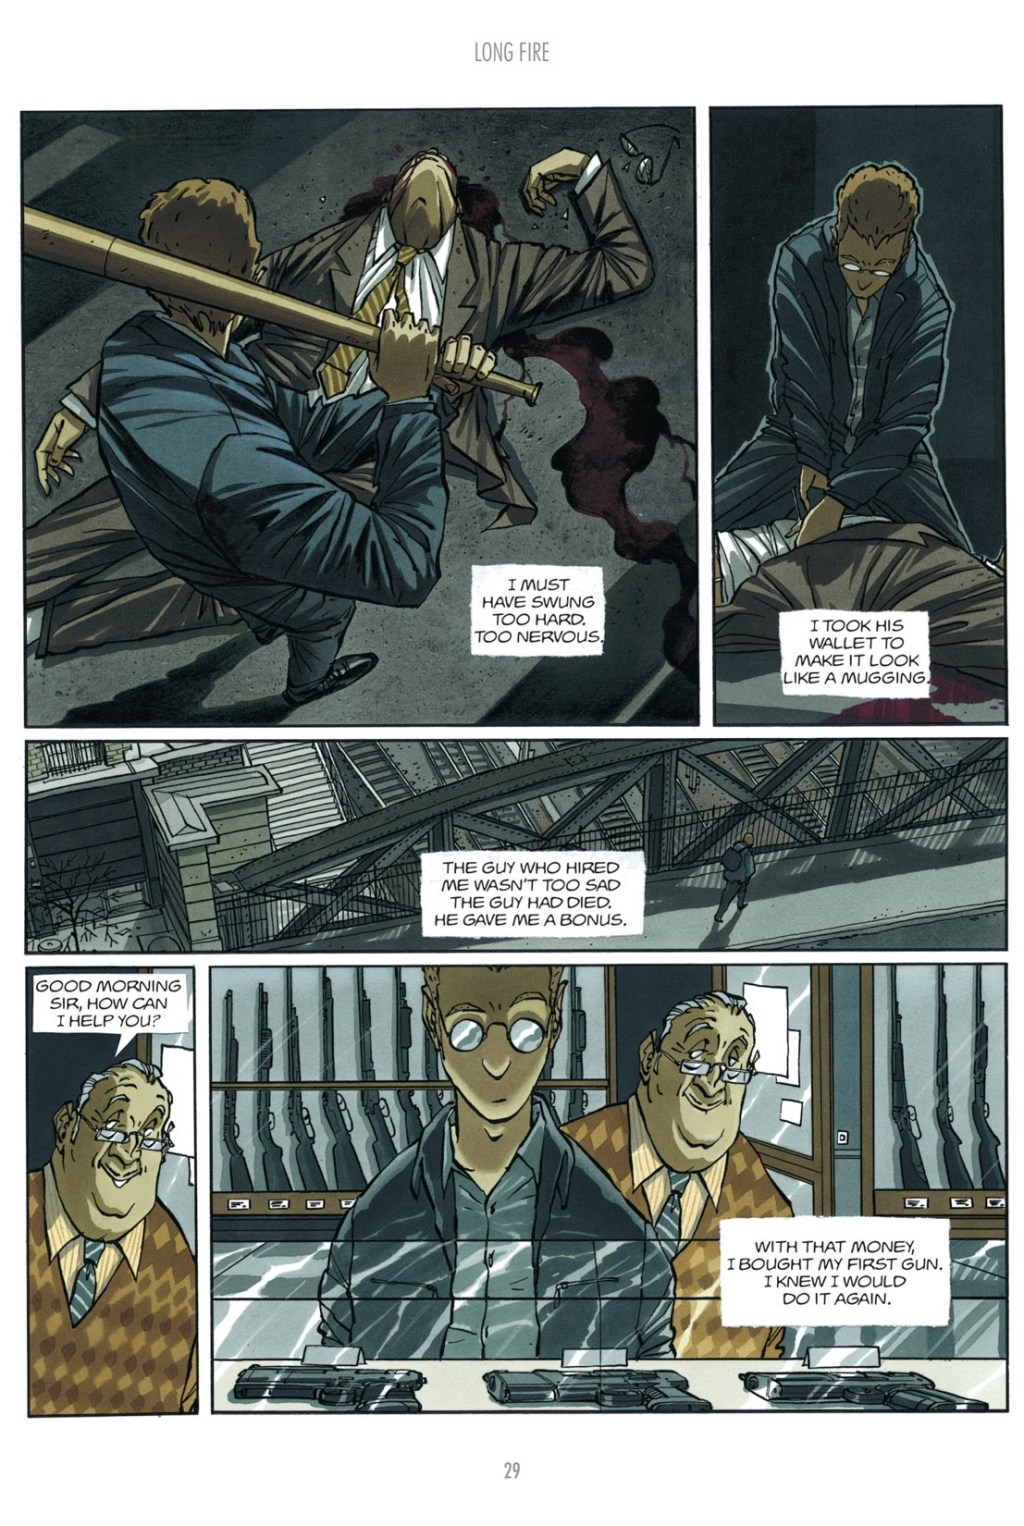 The Killer Vol. 1 Issue #1 "Long Fire, Part One" (2006), Archaia. Words by Matz, art by Luc Jacamon.